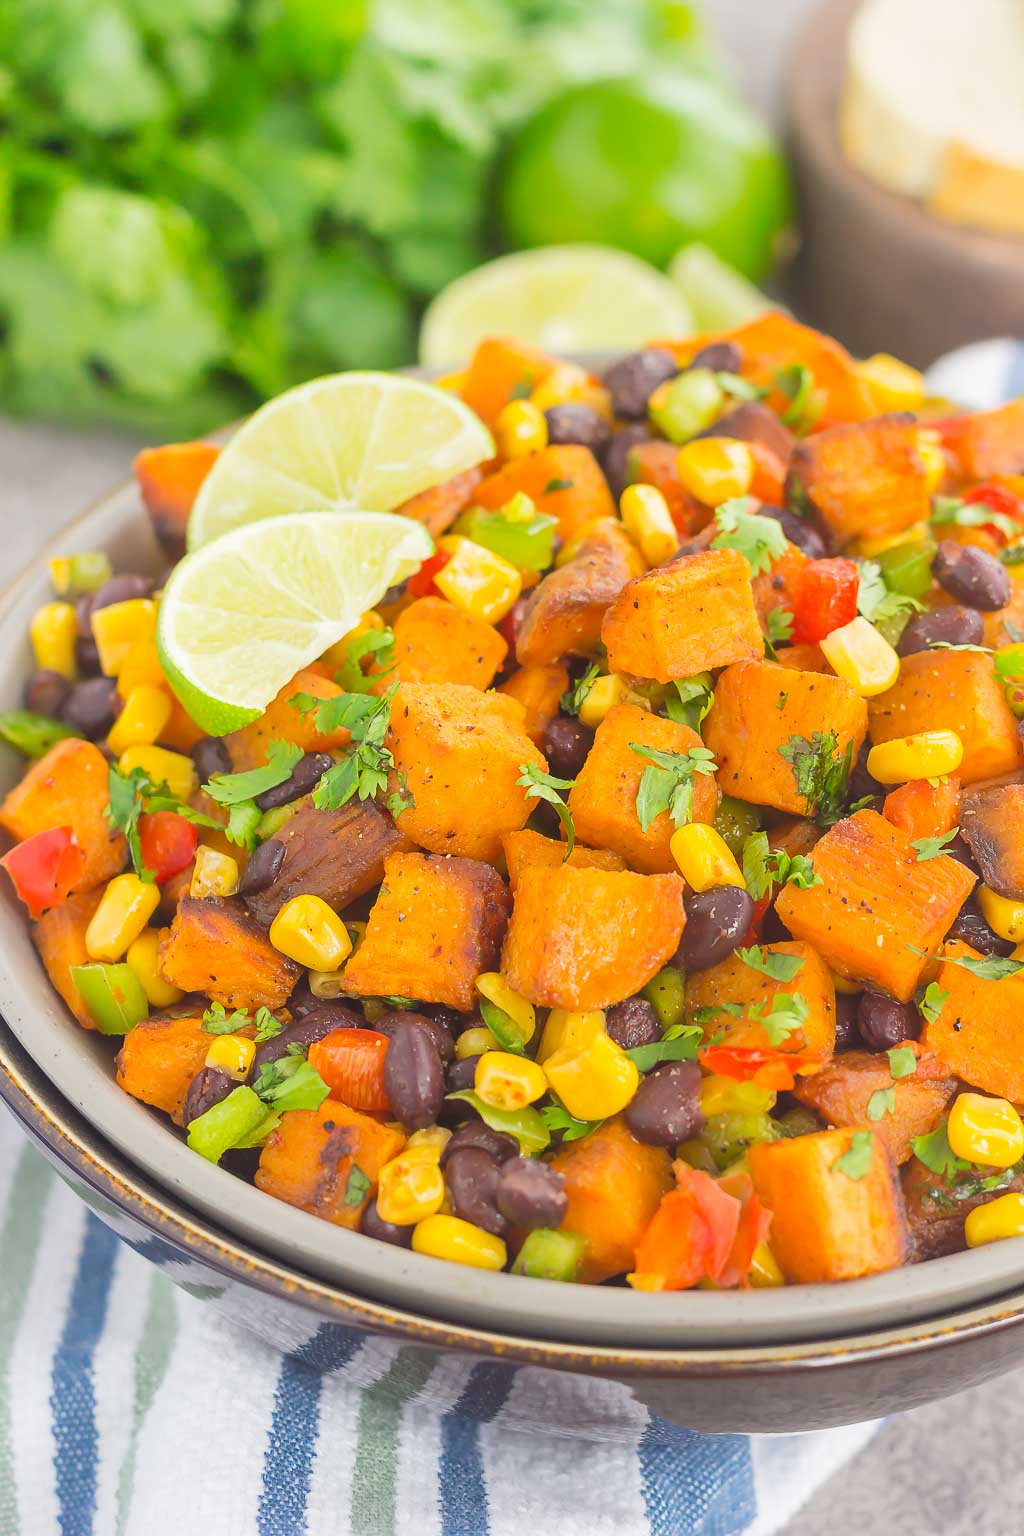 dish of roasted sweet potato salad garnished with cilantro and lime wedges